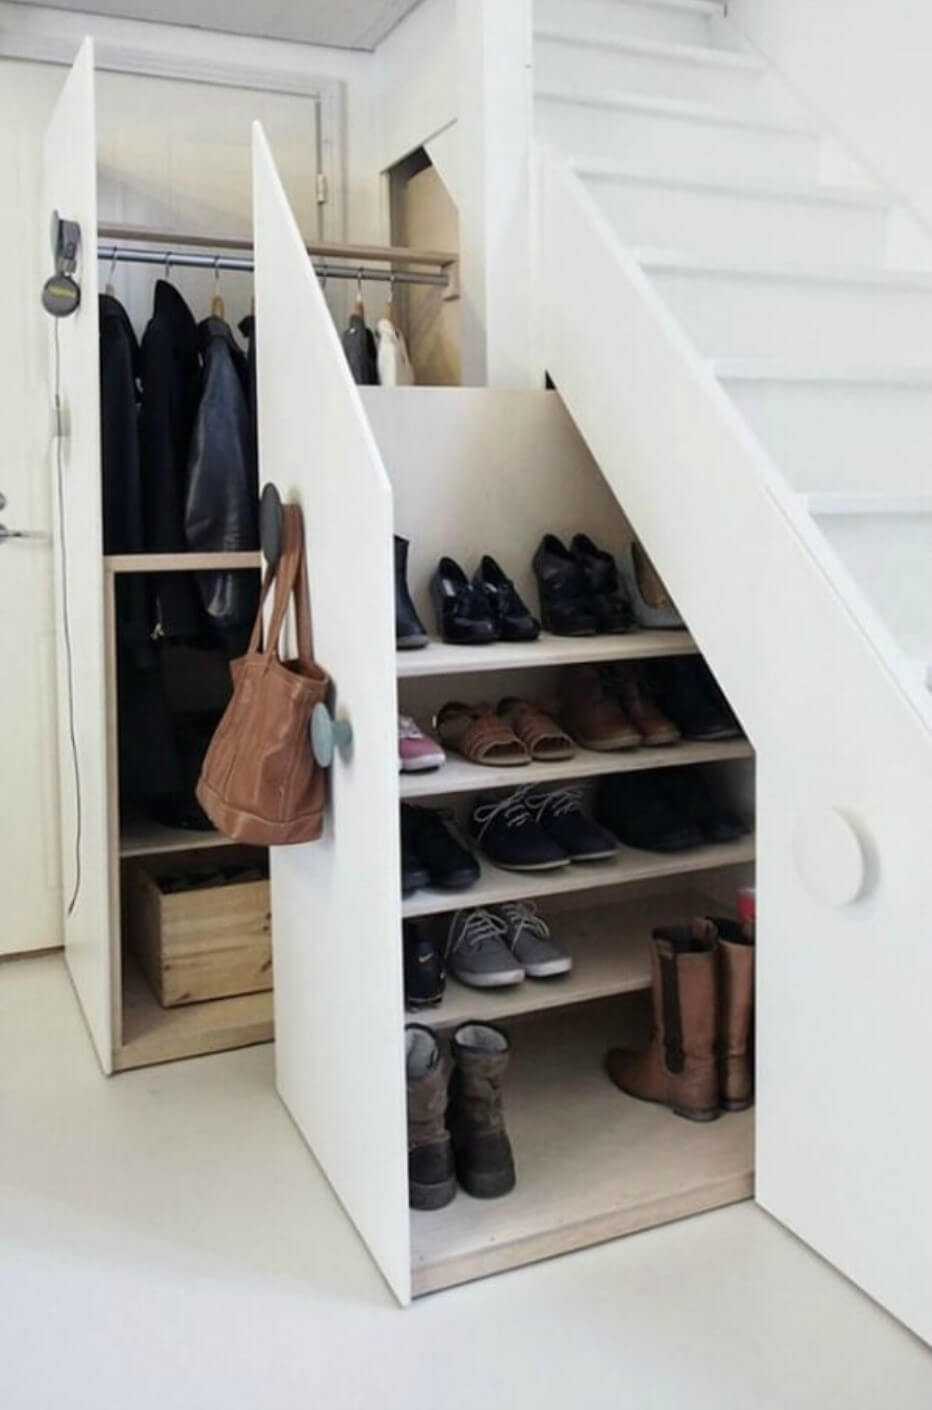 5 storage ideas for small spaces